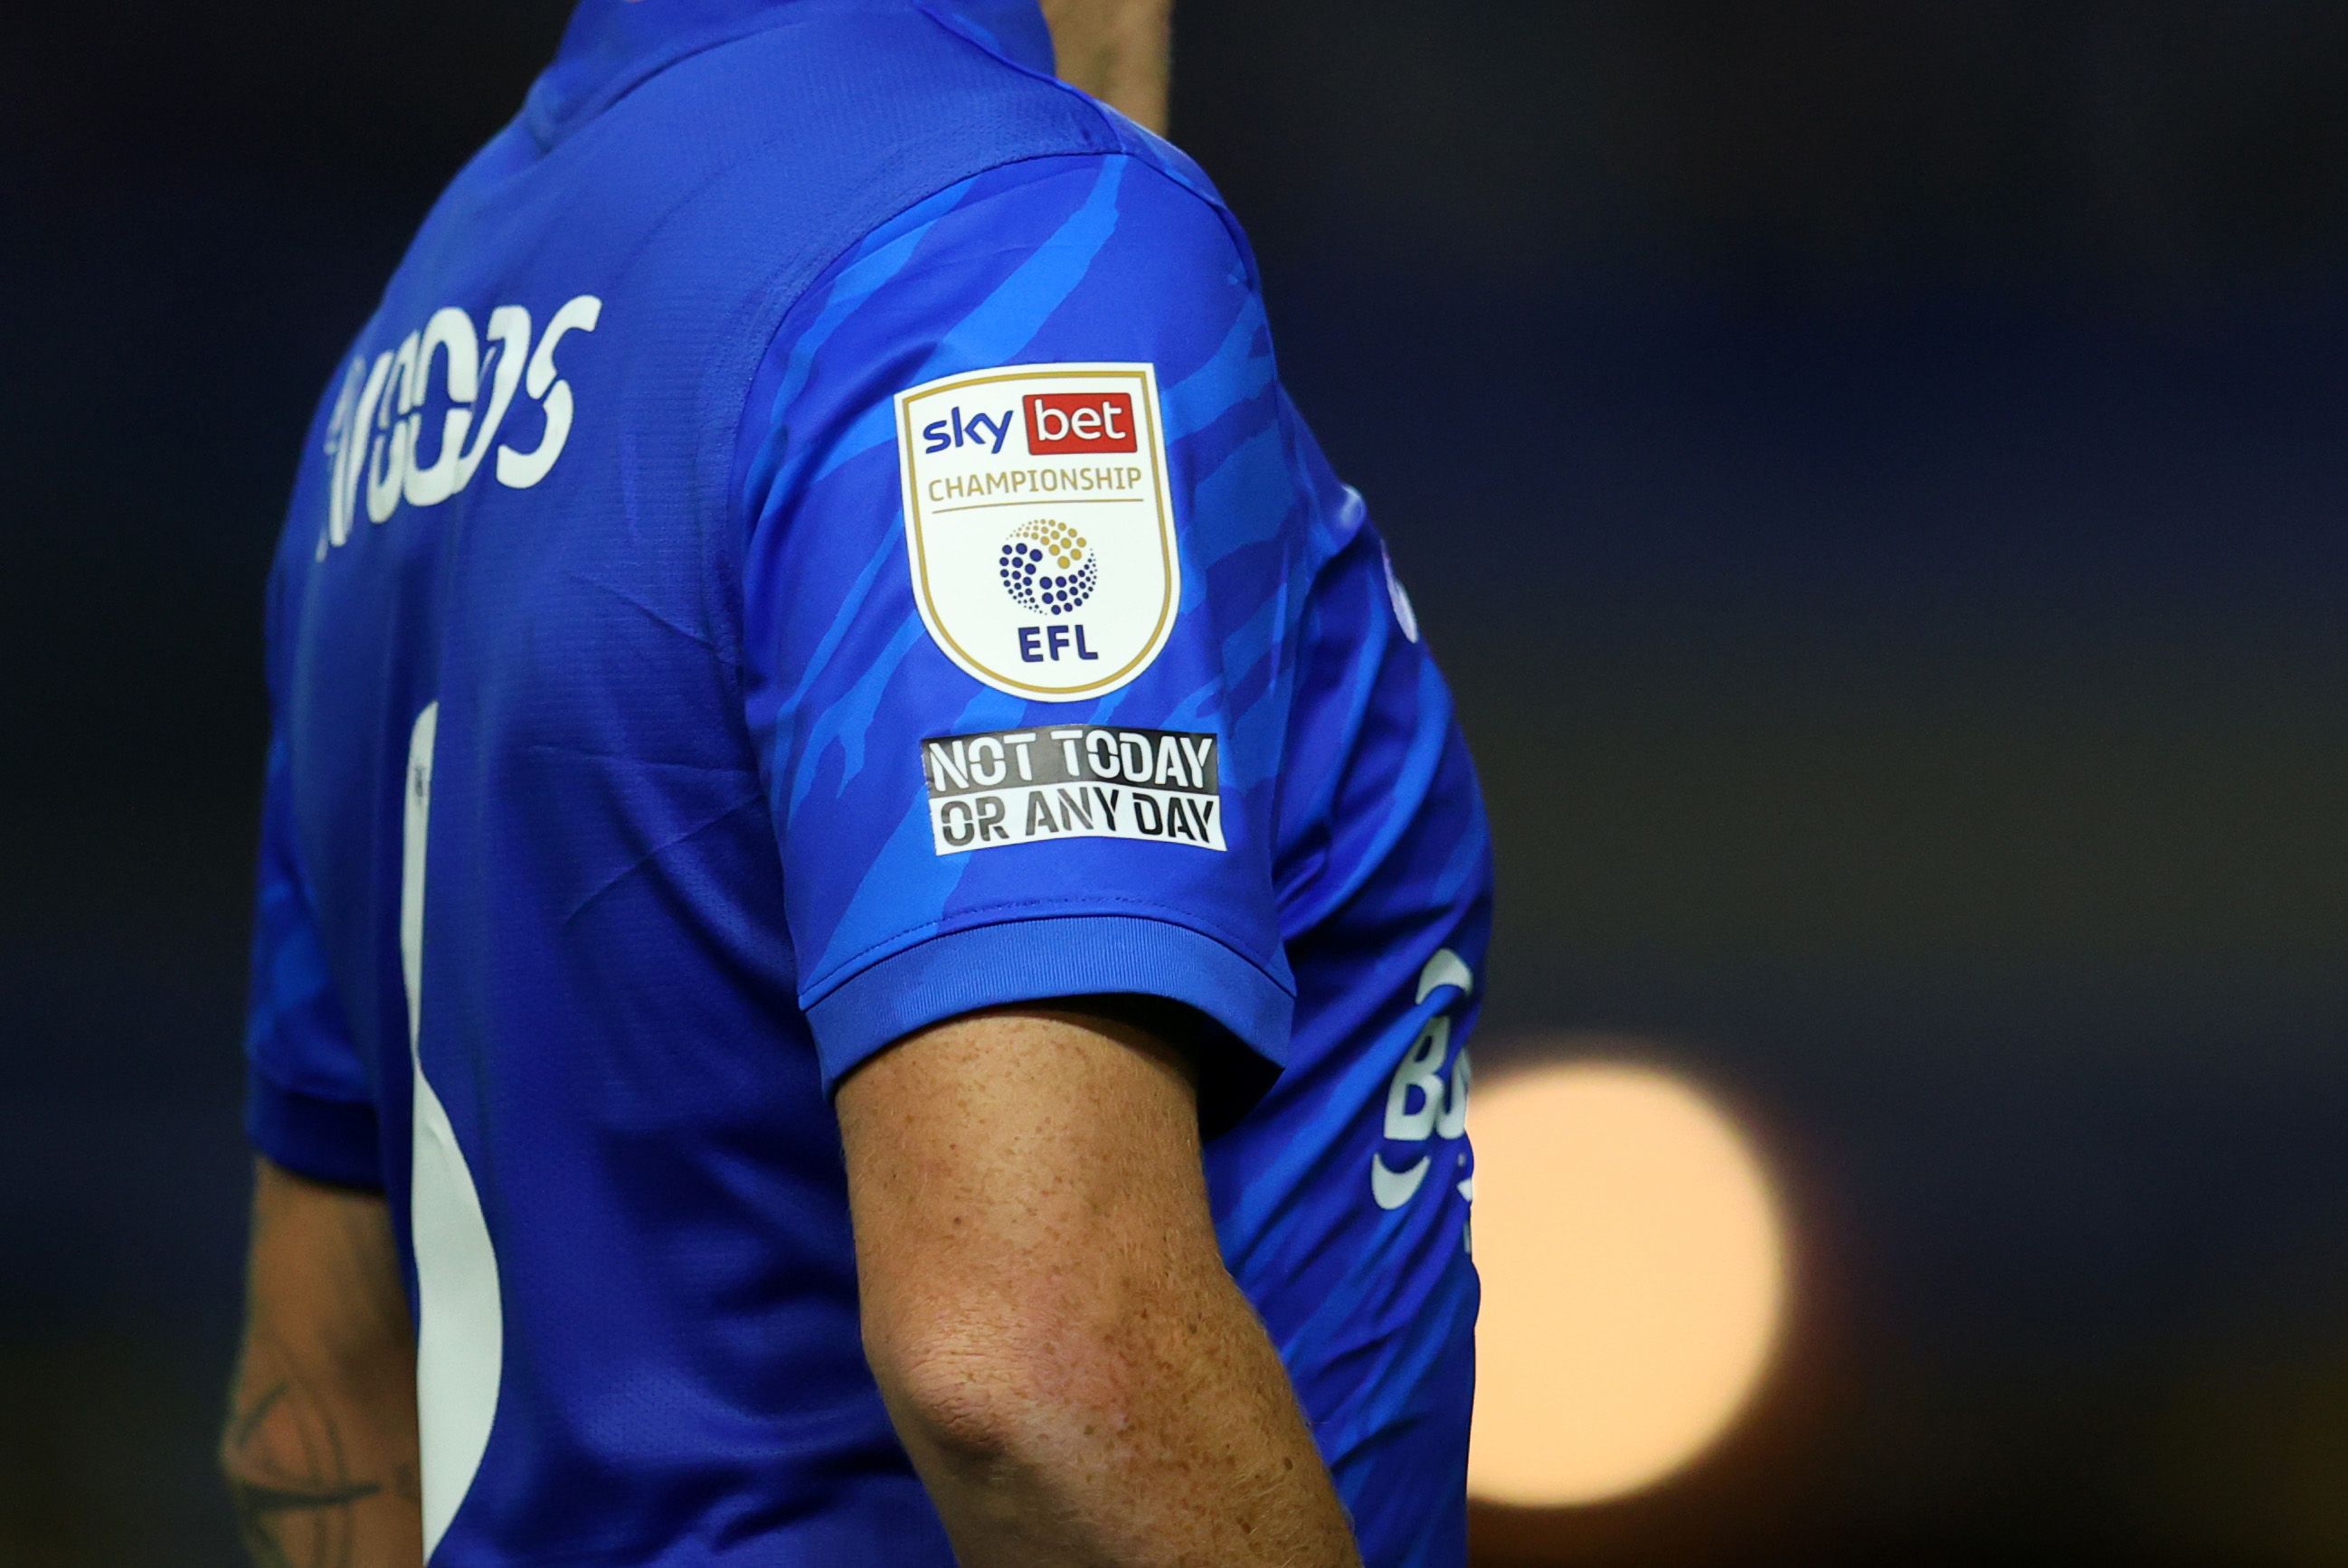 Detailed view of the EFL logo on the sleeve patch and the ' Not today or any day ' slogan during the Sky Bet Championship match between Birmingham City and AFC Bournemouth at St Andrew's Trillion Trophy Stadium on August 18, 2021 in Birmingham, England